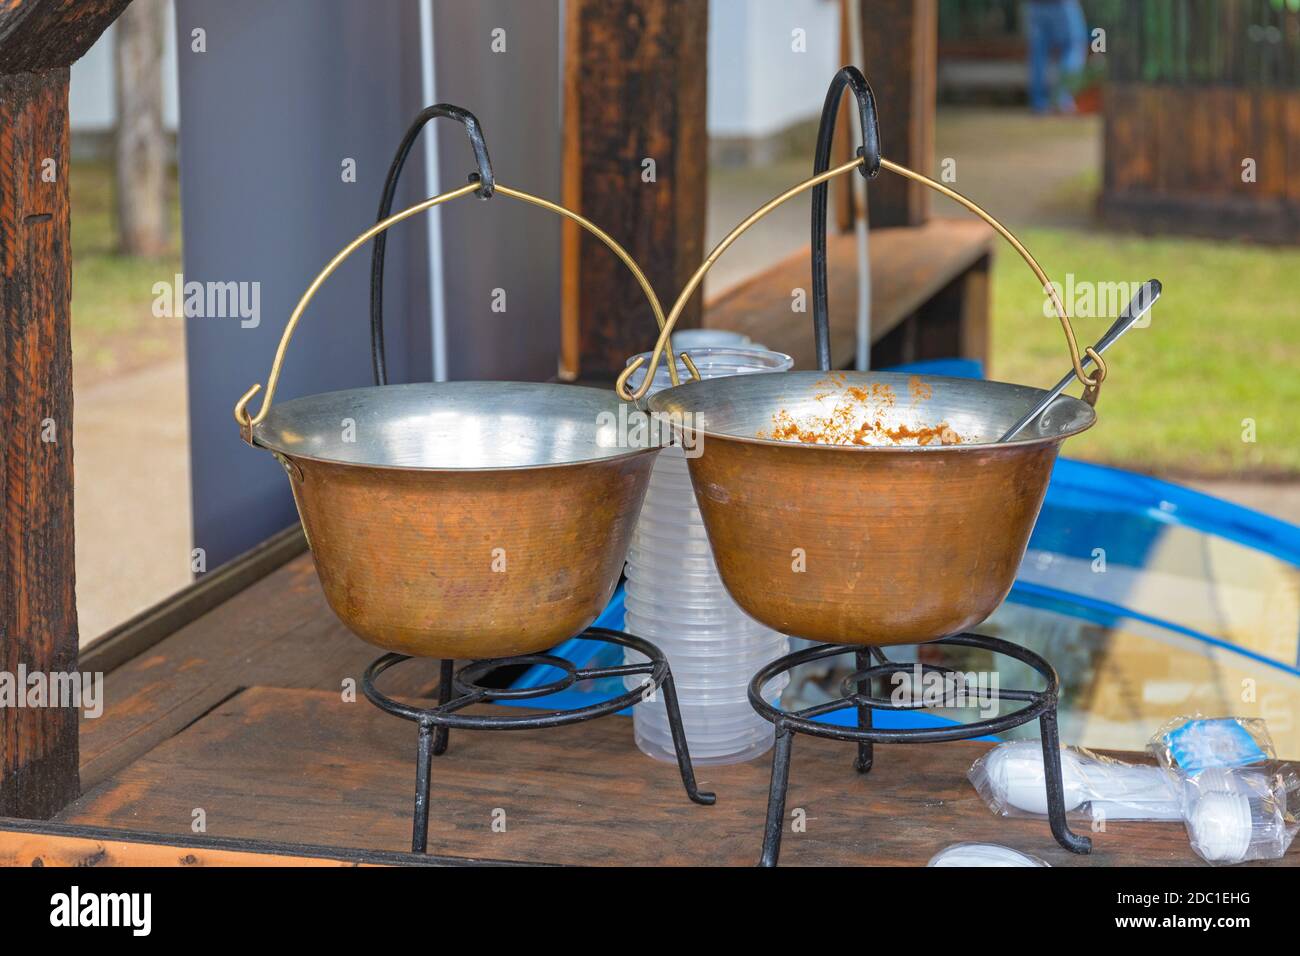 https://c8.alamy.com/comp/2DC1EHG/two-cast-iron-cauldrons-at-stand-in-kitchen-2DC1EHG.jpg